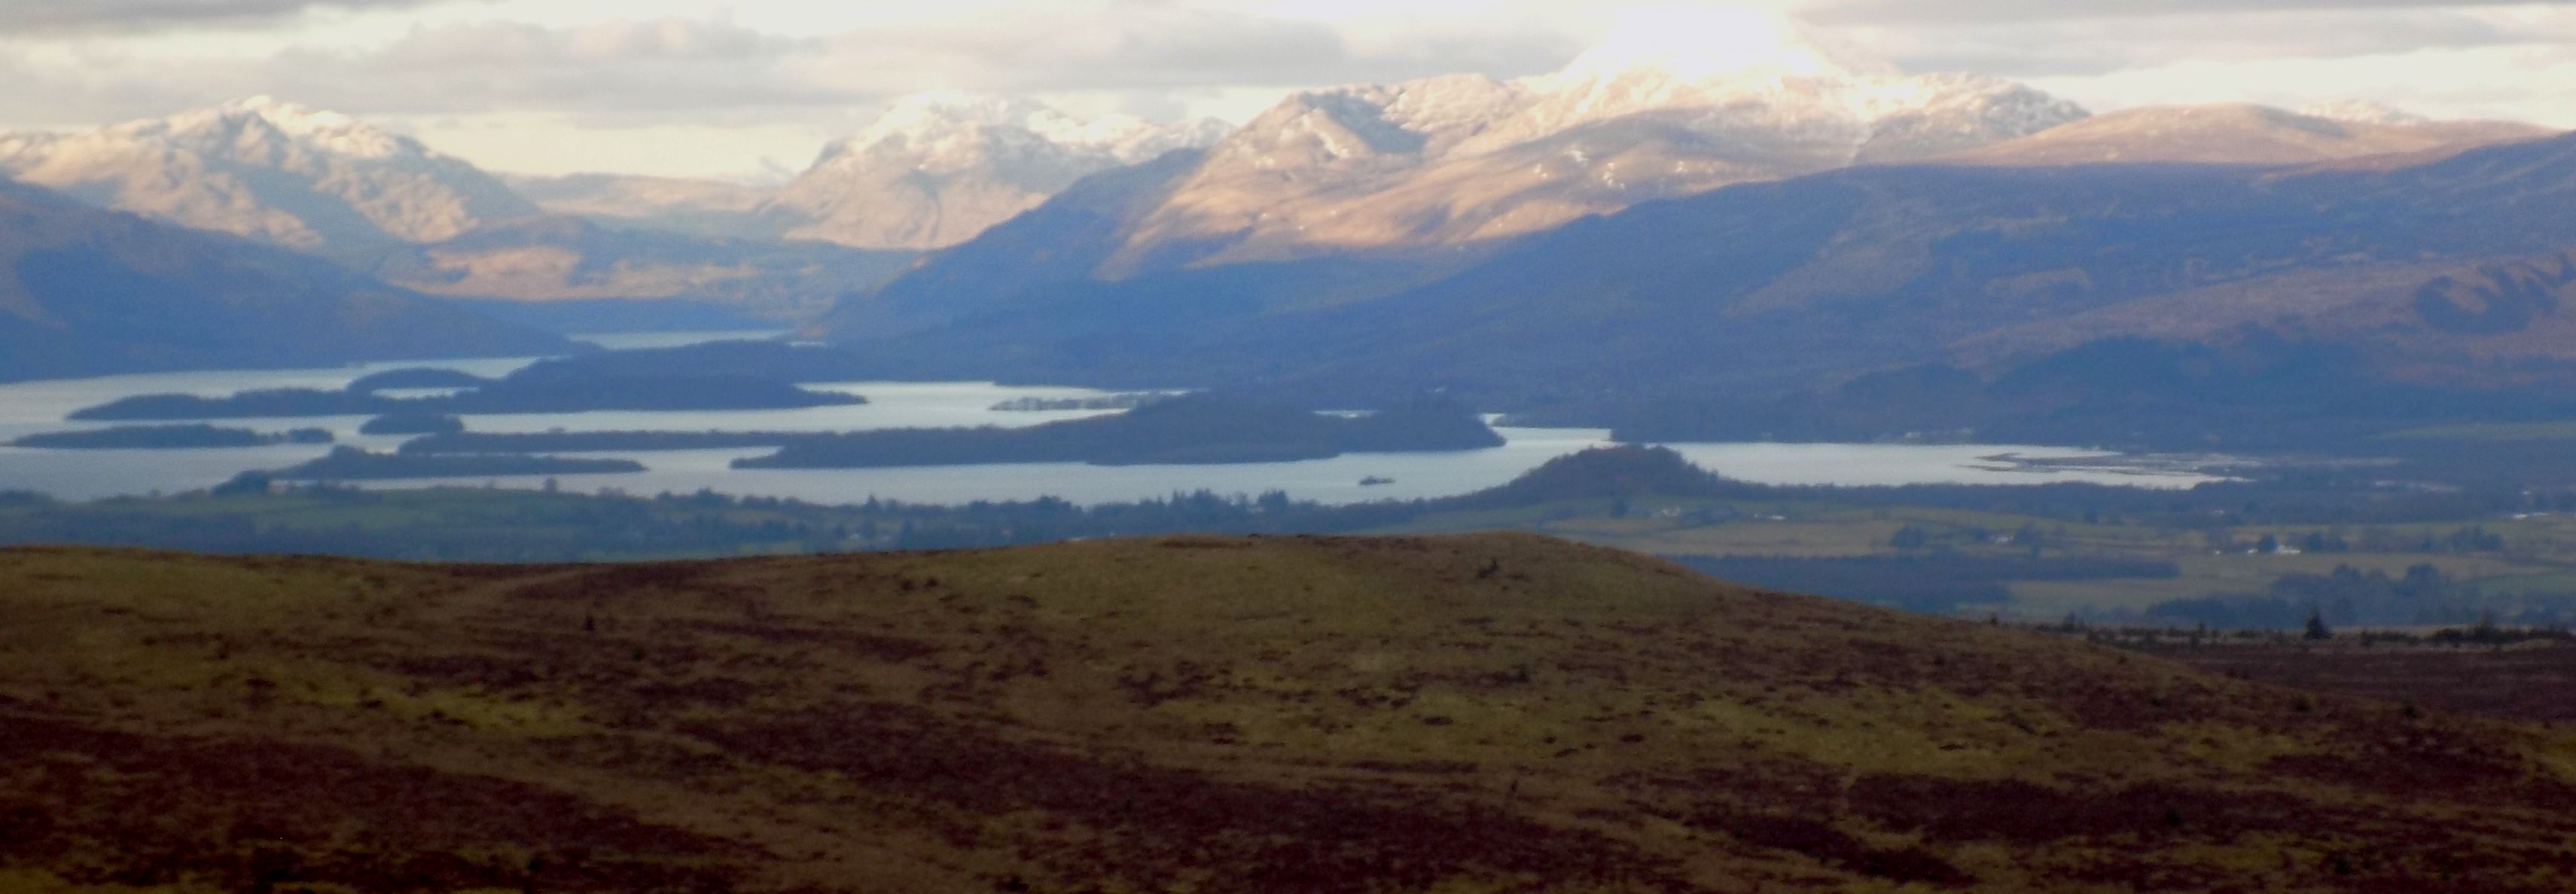 Loch Lomond and Ben Lomond from trig point on Duncolm